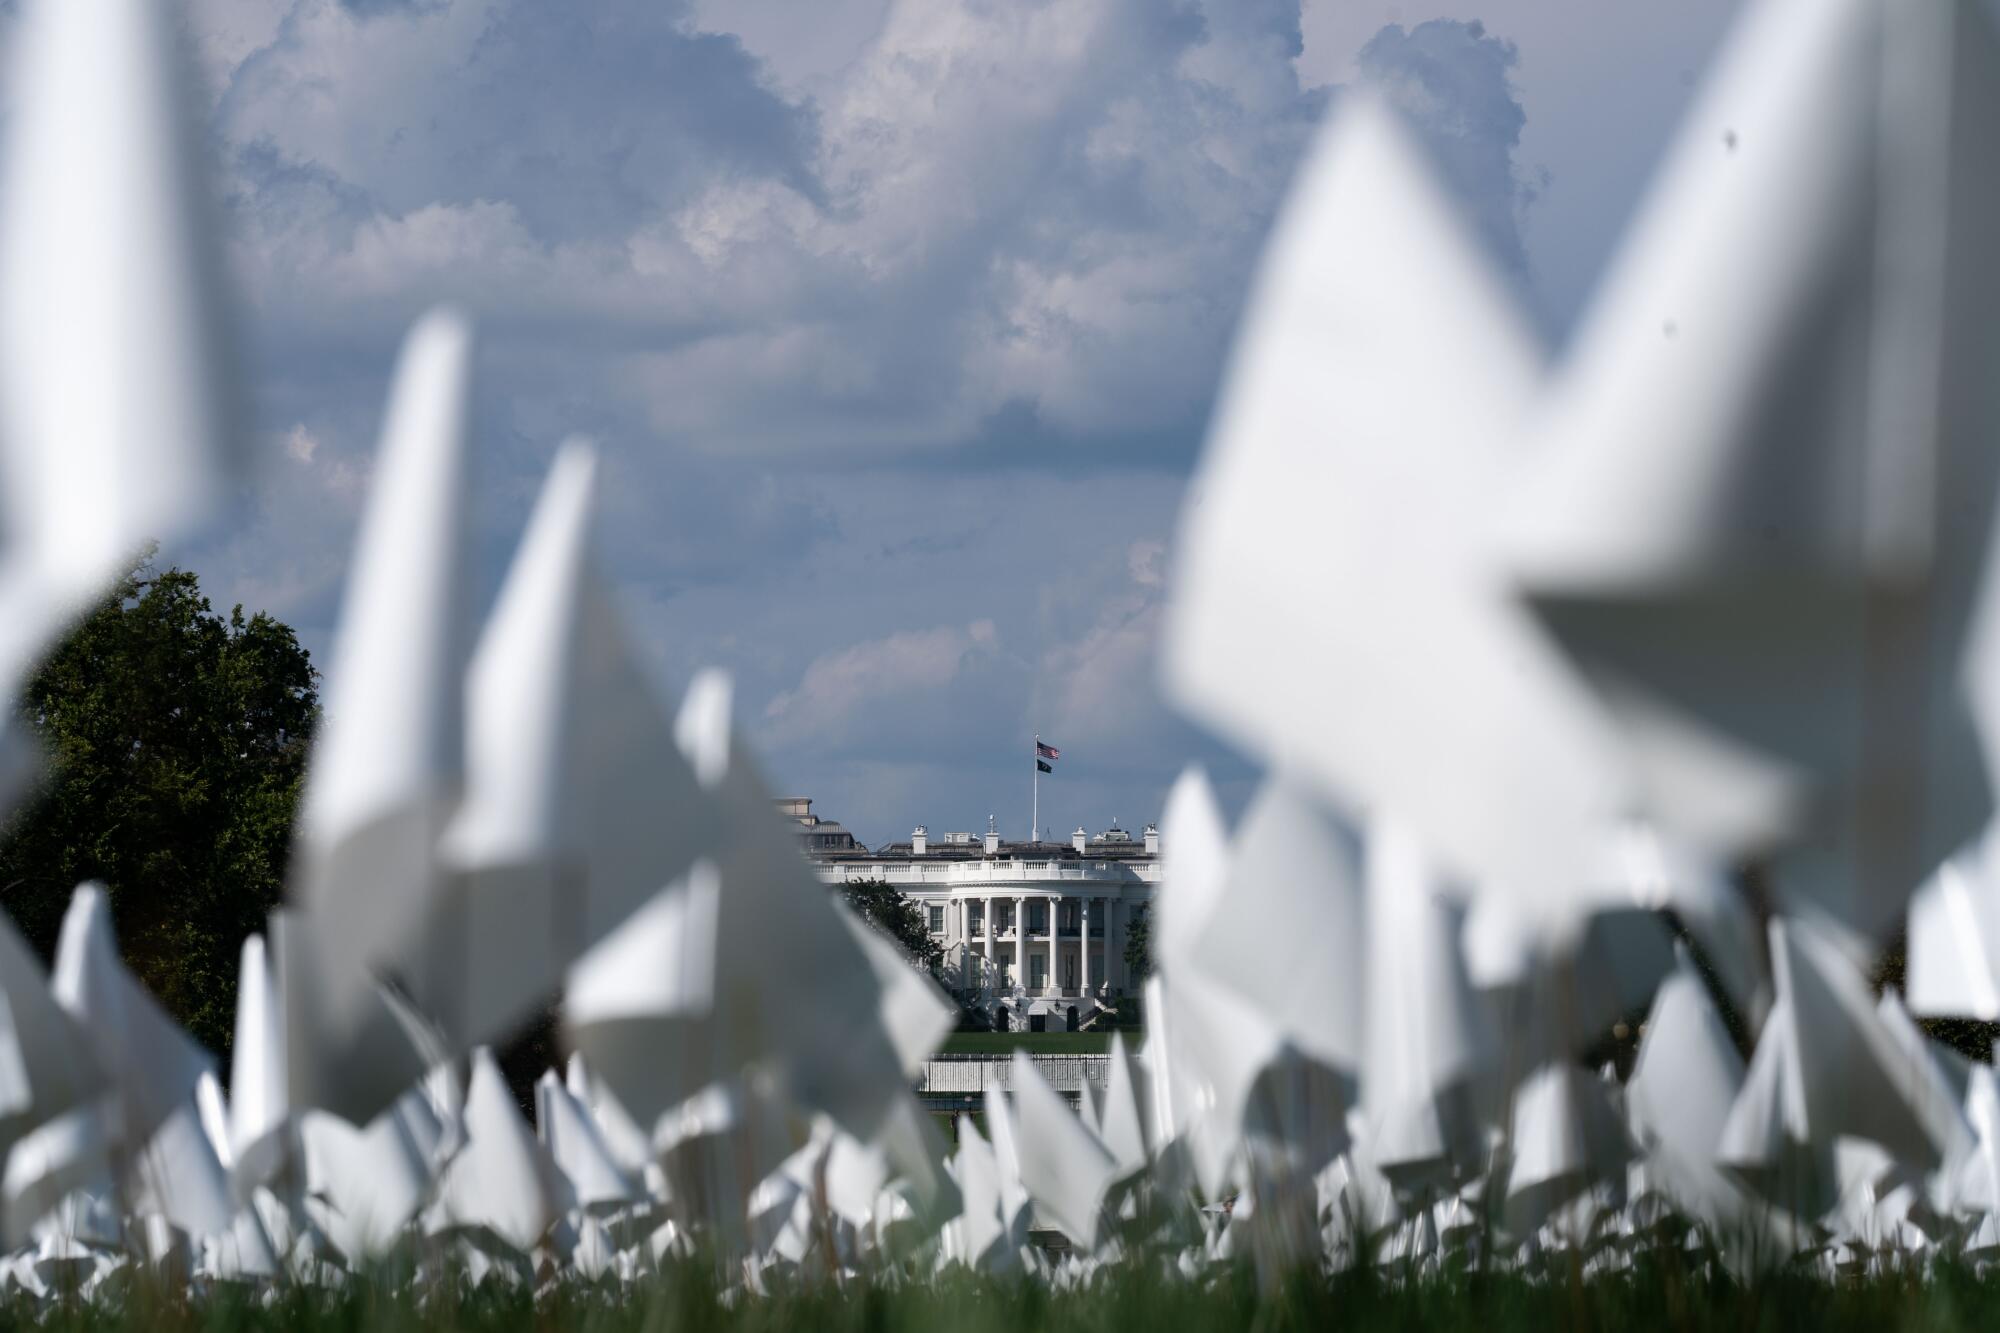 Rows of small white flags, with the White House in the far background